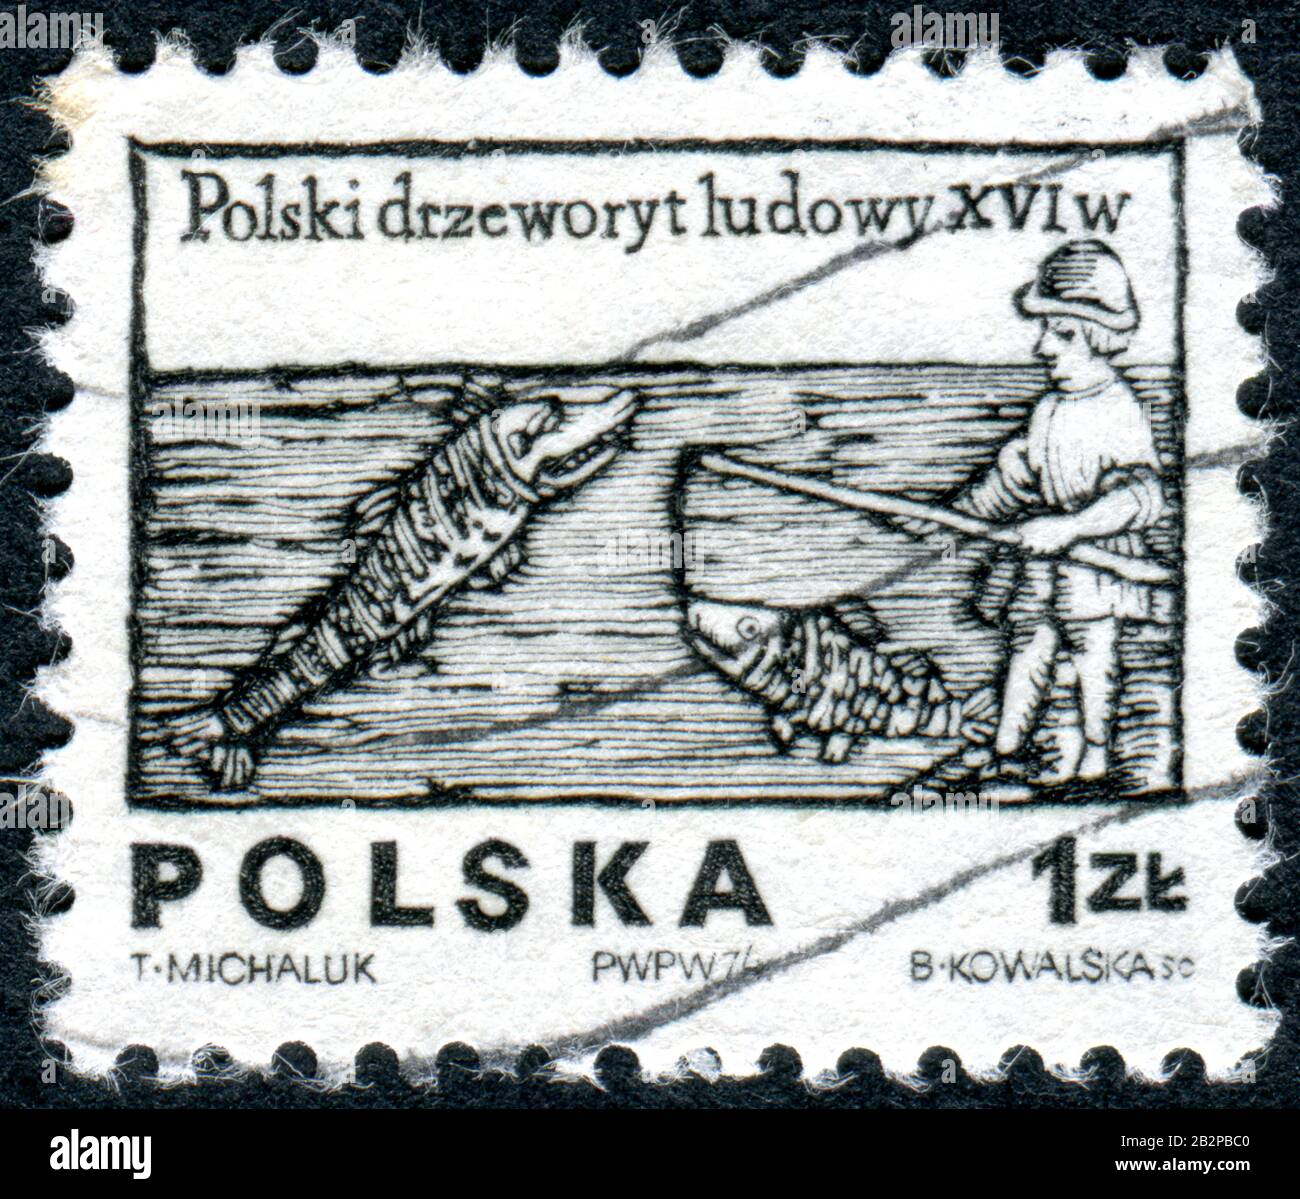 POLAND - CIRCA 1974: A stamp printed in Poland, depicted designs from 16th century woodcuts - Angler, circa 1974 Stock Photo